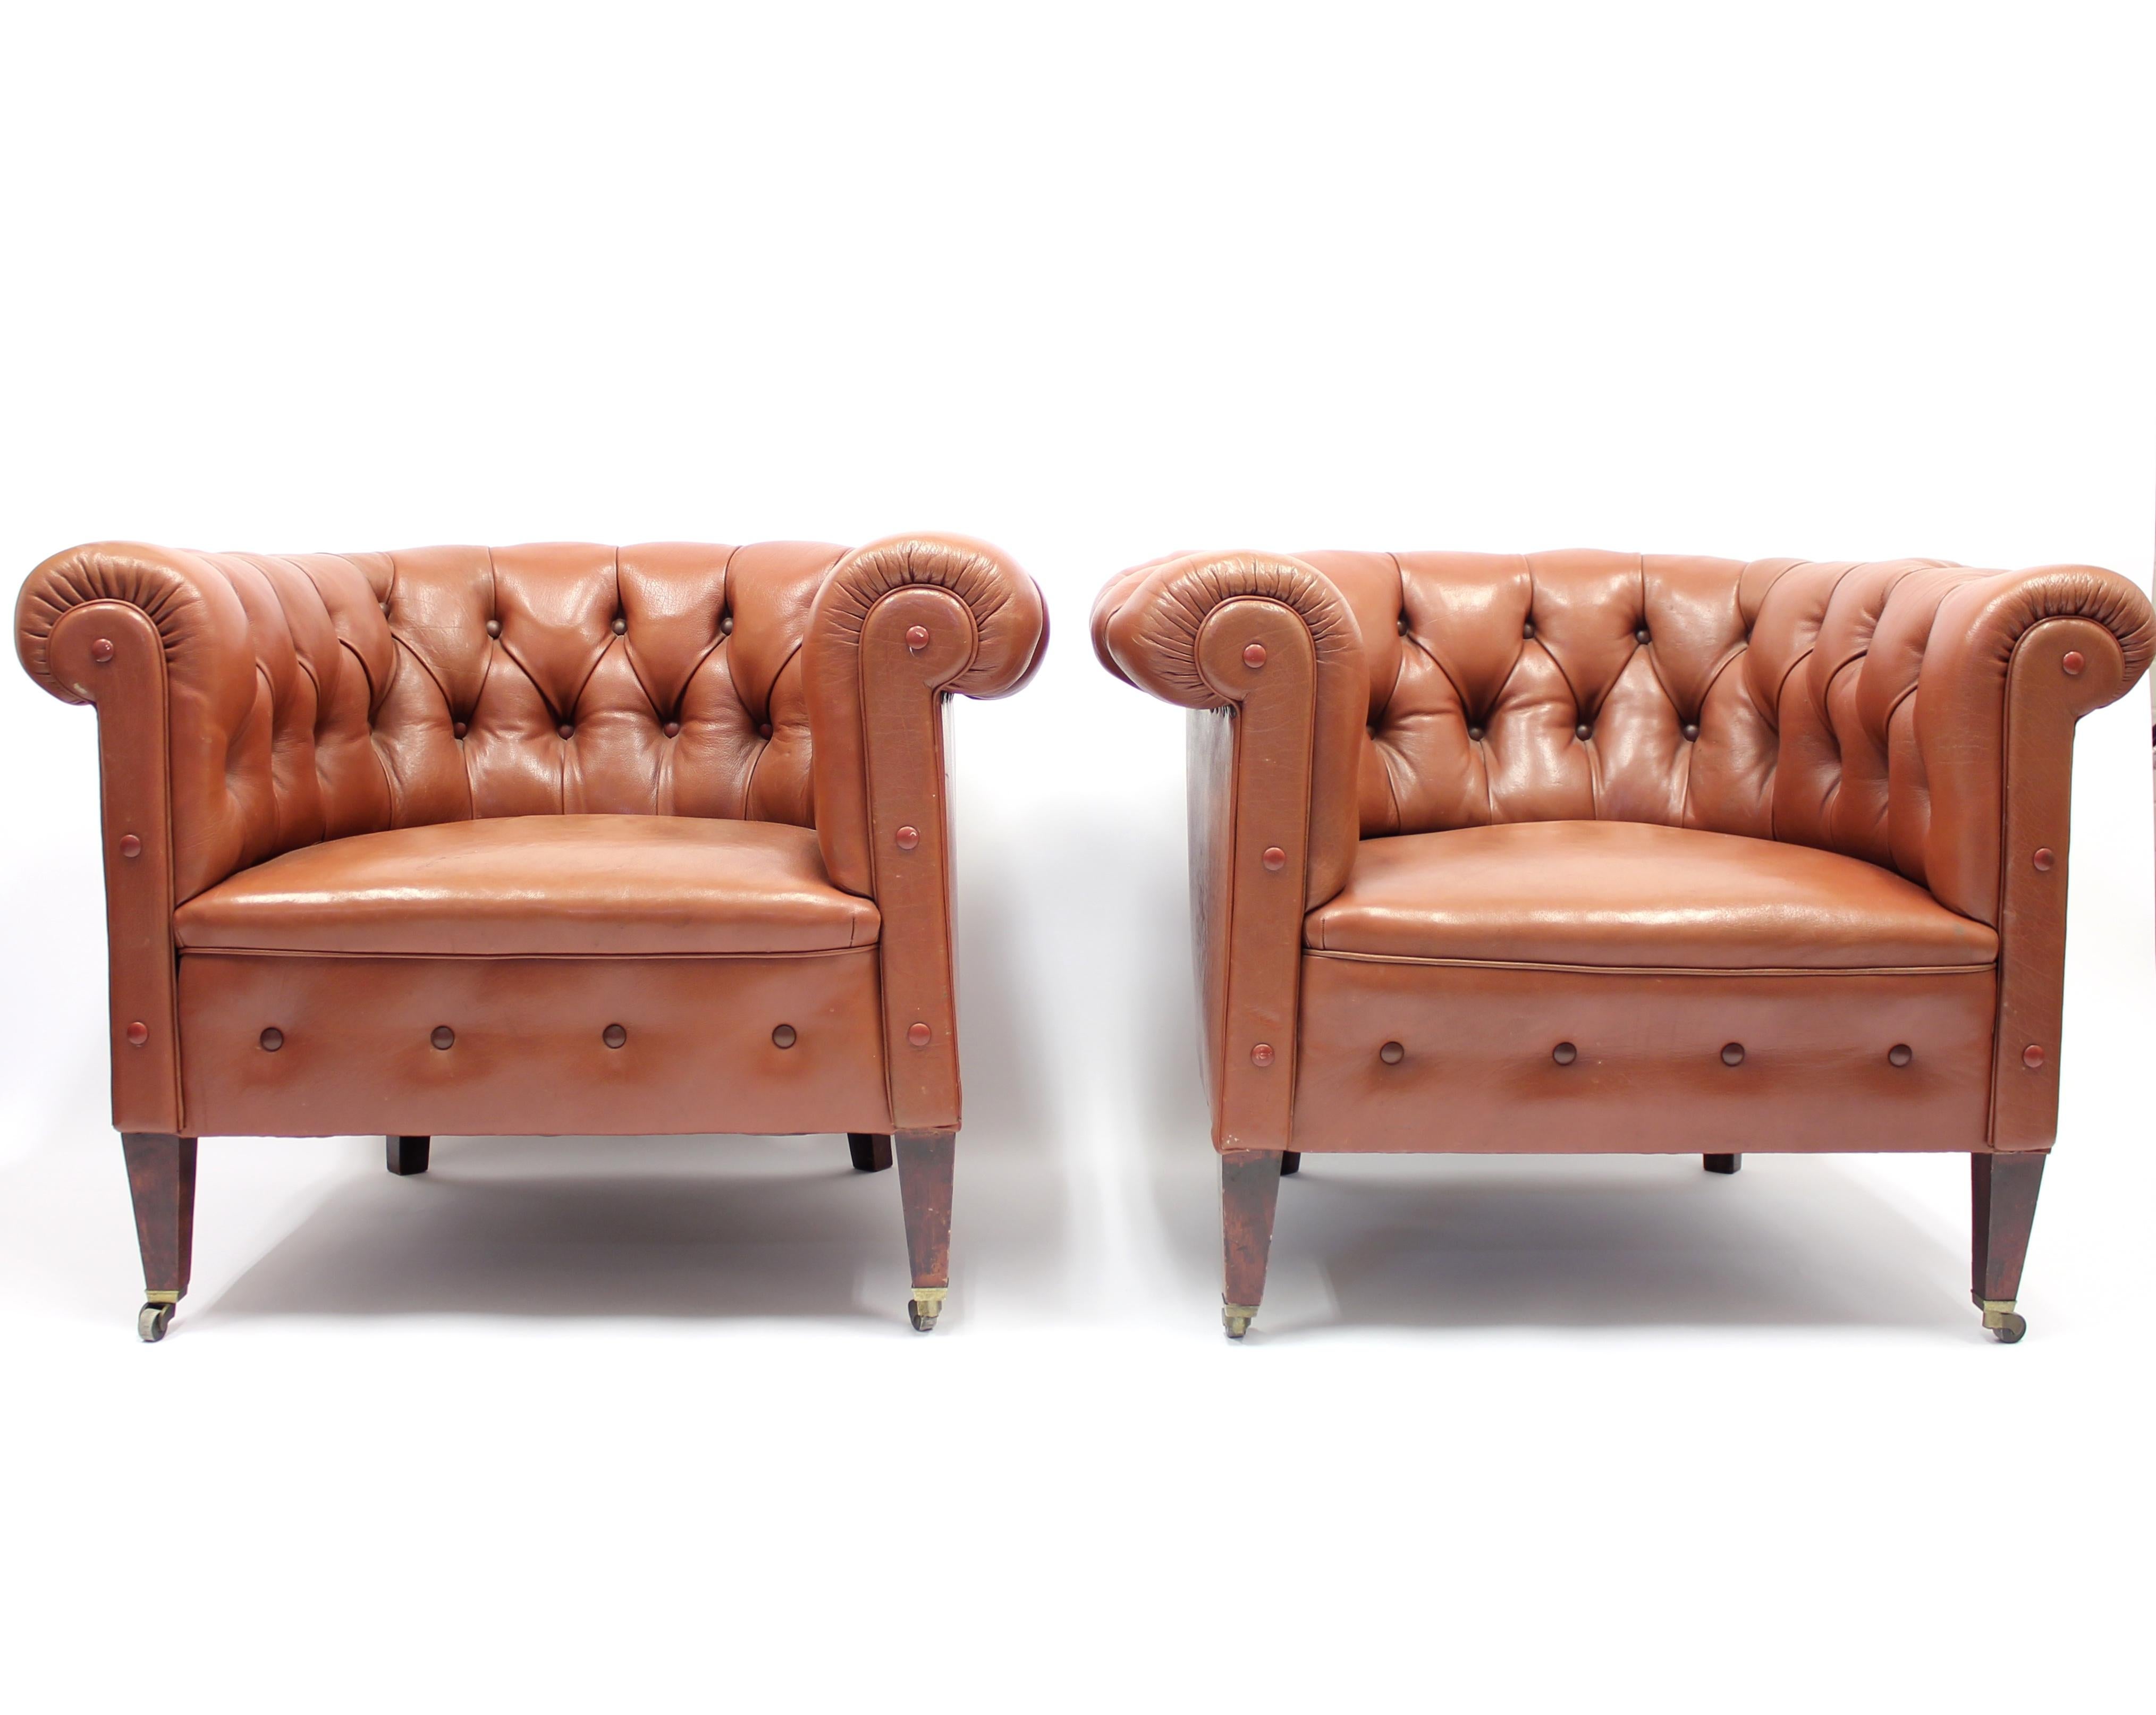 Pair of 1930s-1940s Chesterfield club chairs in brown leather on mahogany legs with brass castors on the fornt legs. Unusual and superb shape. The leather may be of a later date but has some age to it. Very good condition when age is considered with